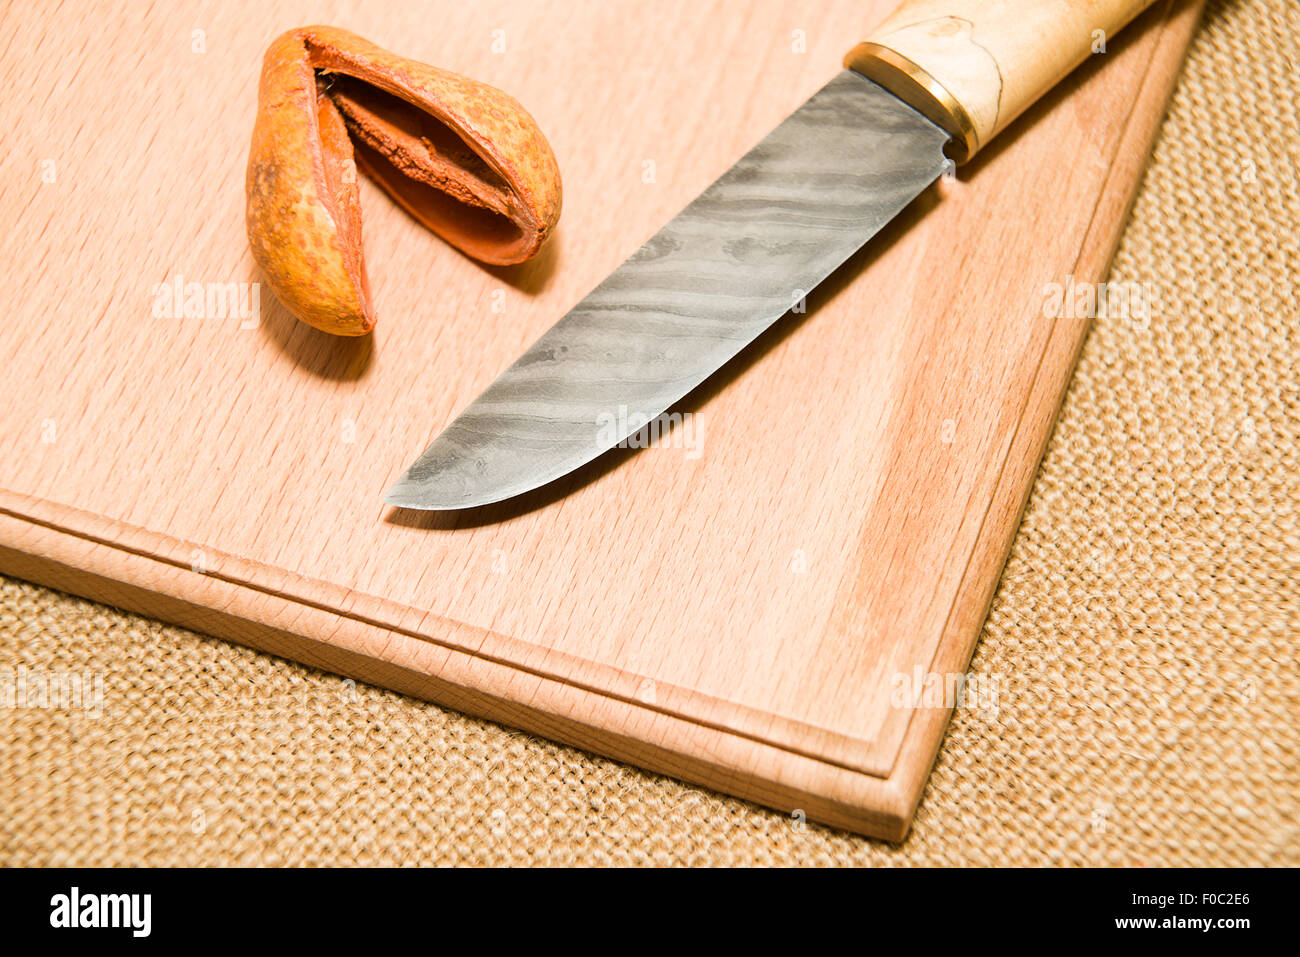 Honed is a hunting knife on a wooden surface Stock Photo